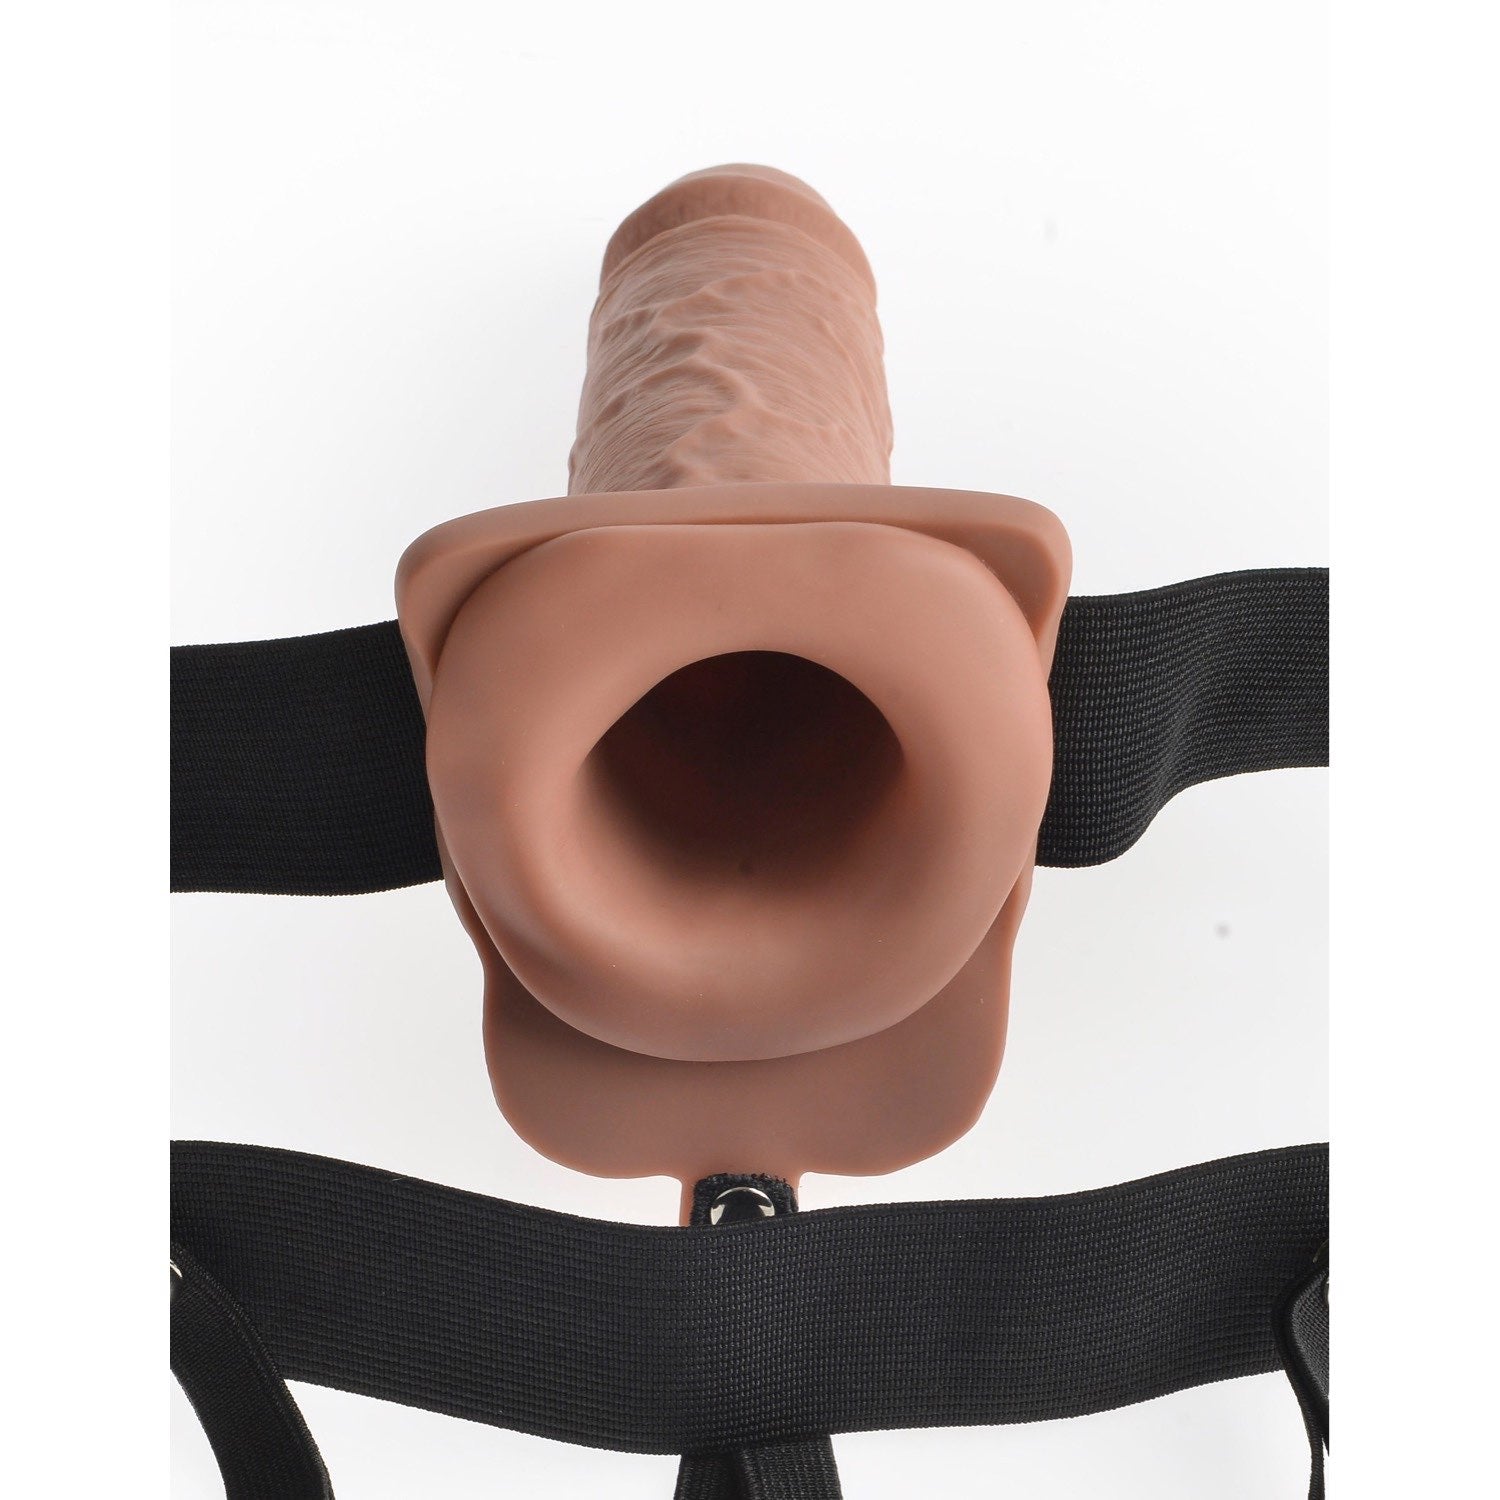 Fetish Fantasy Series 7&quot; Hollow Rechargeable Strap-On with Balls - Tan 17.8 cm Vibrating Hollow Strap-On by Pipedream